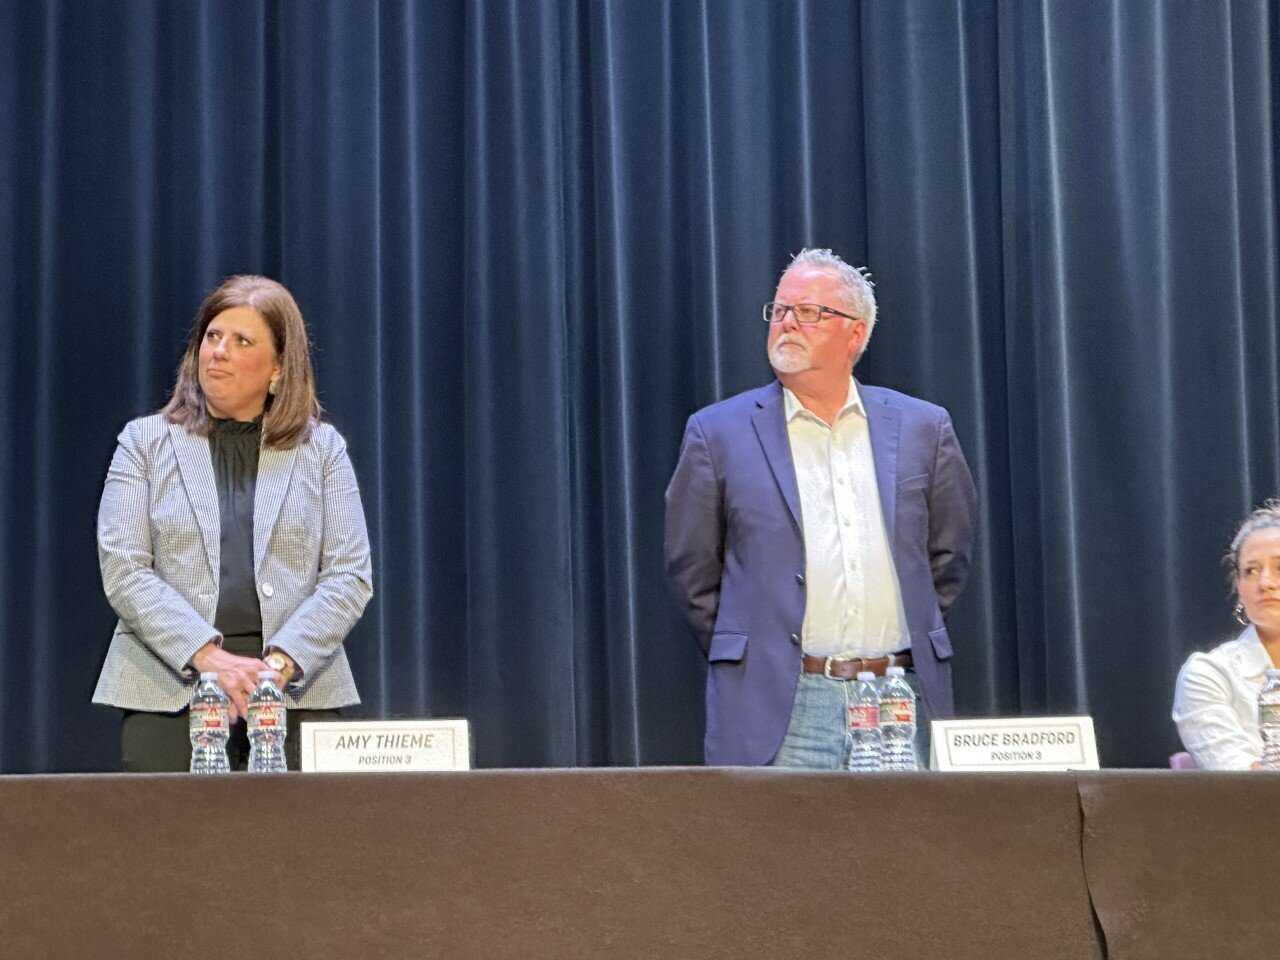 Katy ISD position 3 trustee candidates Amy Thieme, left, and Bruce Bradford stand as they are introduced at an April 13 candidate forum.